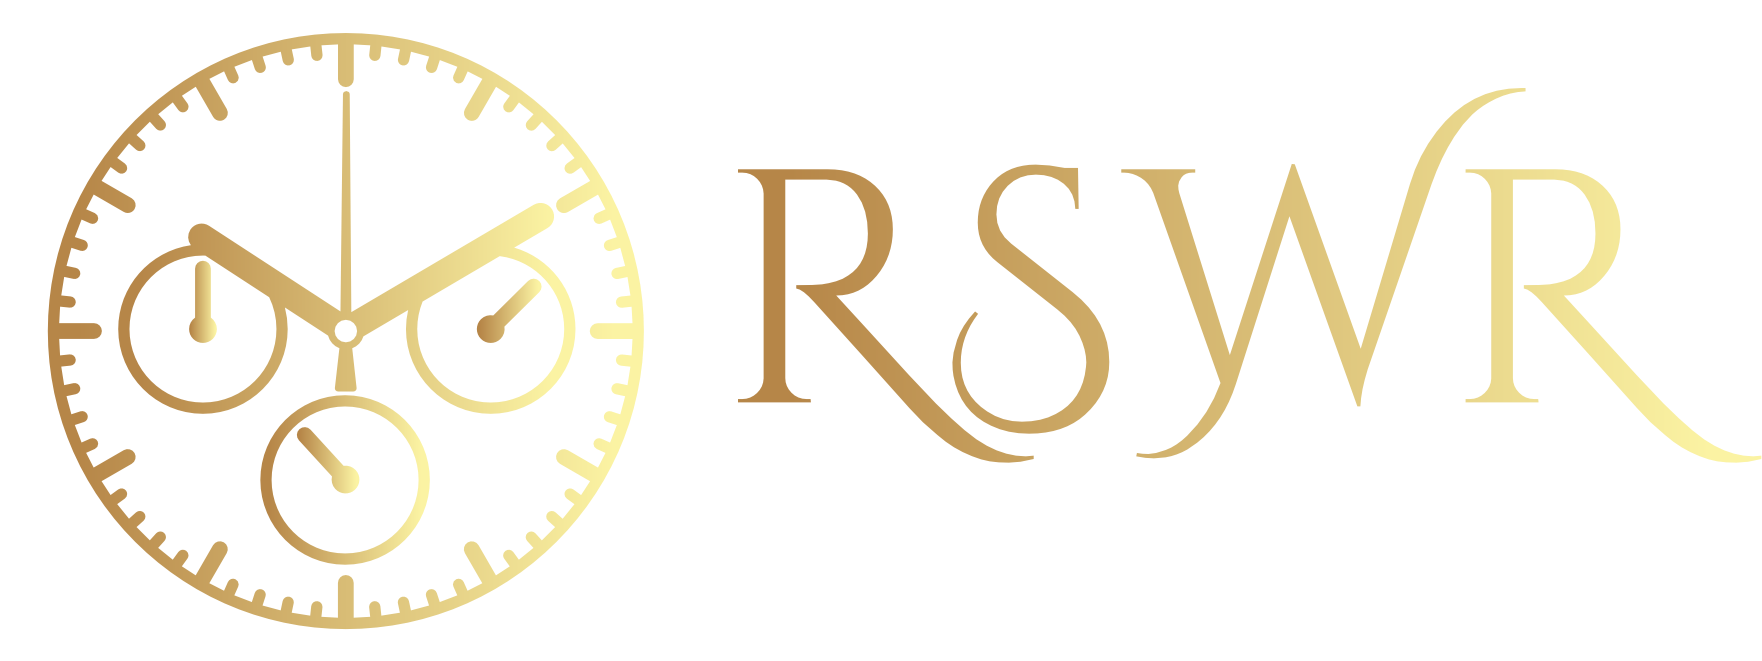 Rs Watch Repairs Ltd - Colosseum Plan (1920x794), Png Download